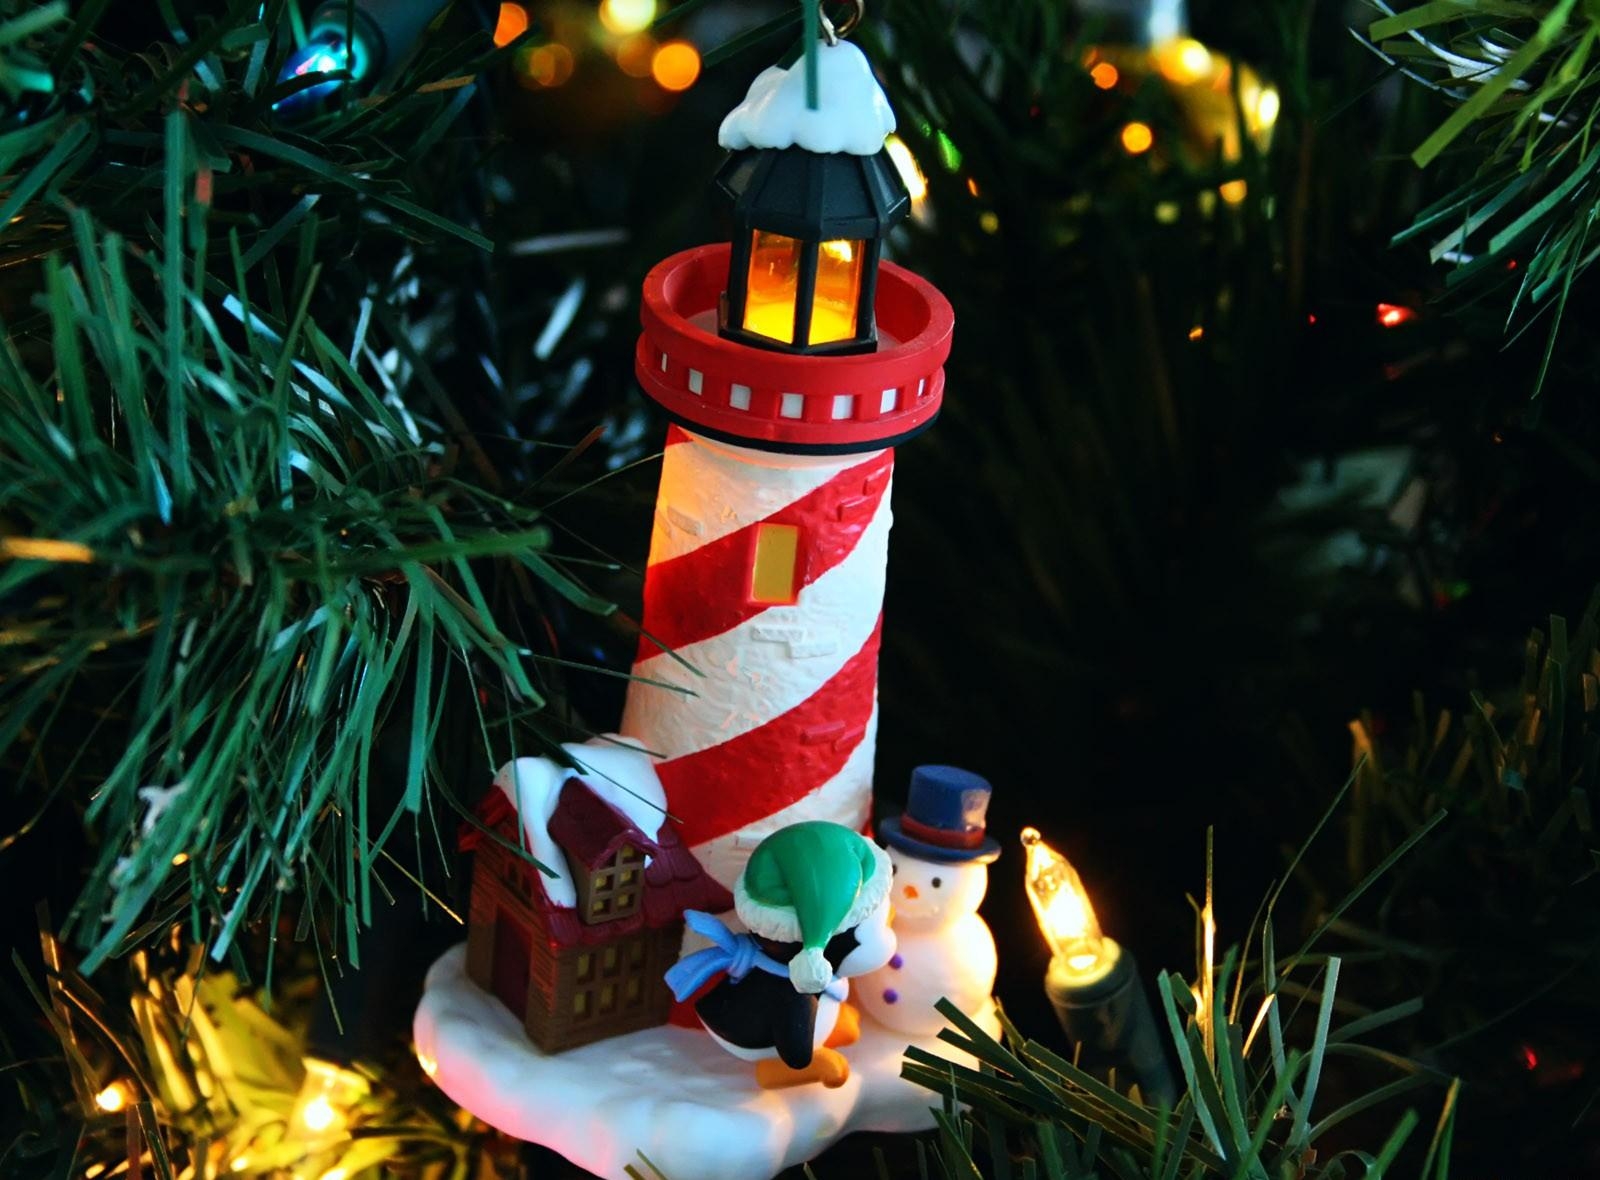 holidays, snowman, holiday, house, lighthouse, christmas tree, garland, figurines, figures, garlands, penguin